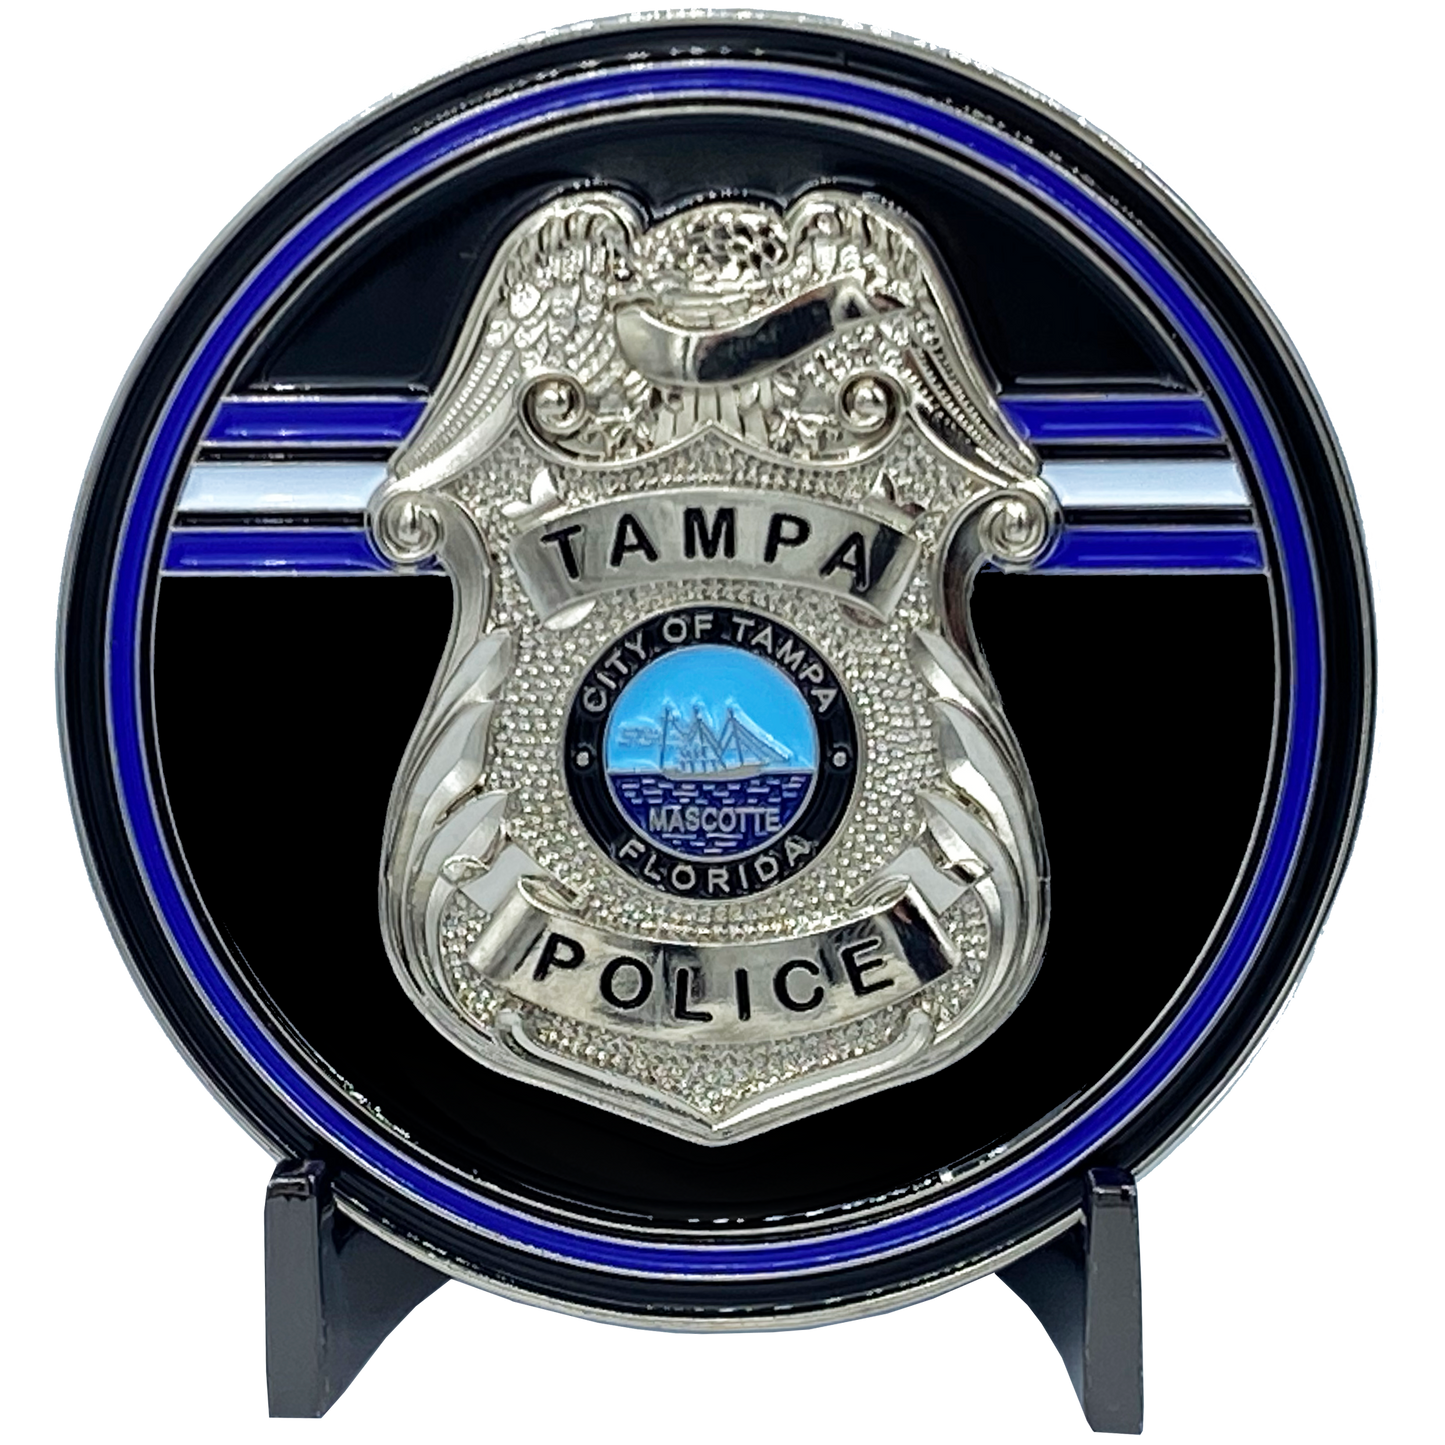 EL2-016 Tampa Florida Police Office Challenge Coin Tampa Bay Thin Blue Line Back the Blue TPD Tampa Police Department